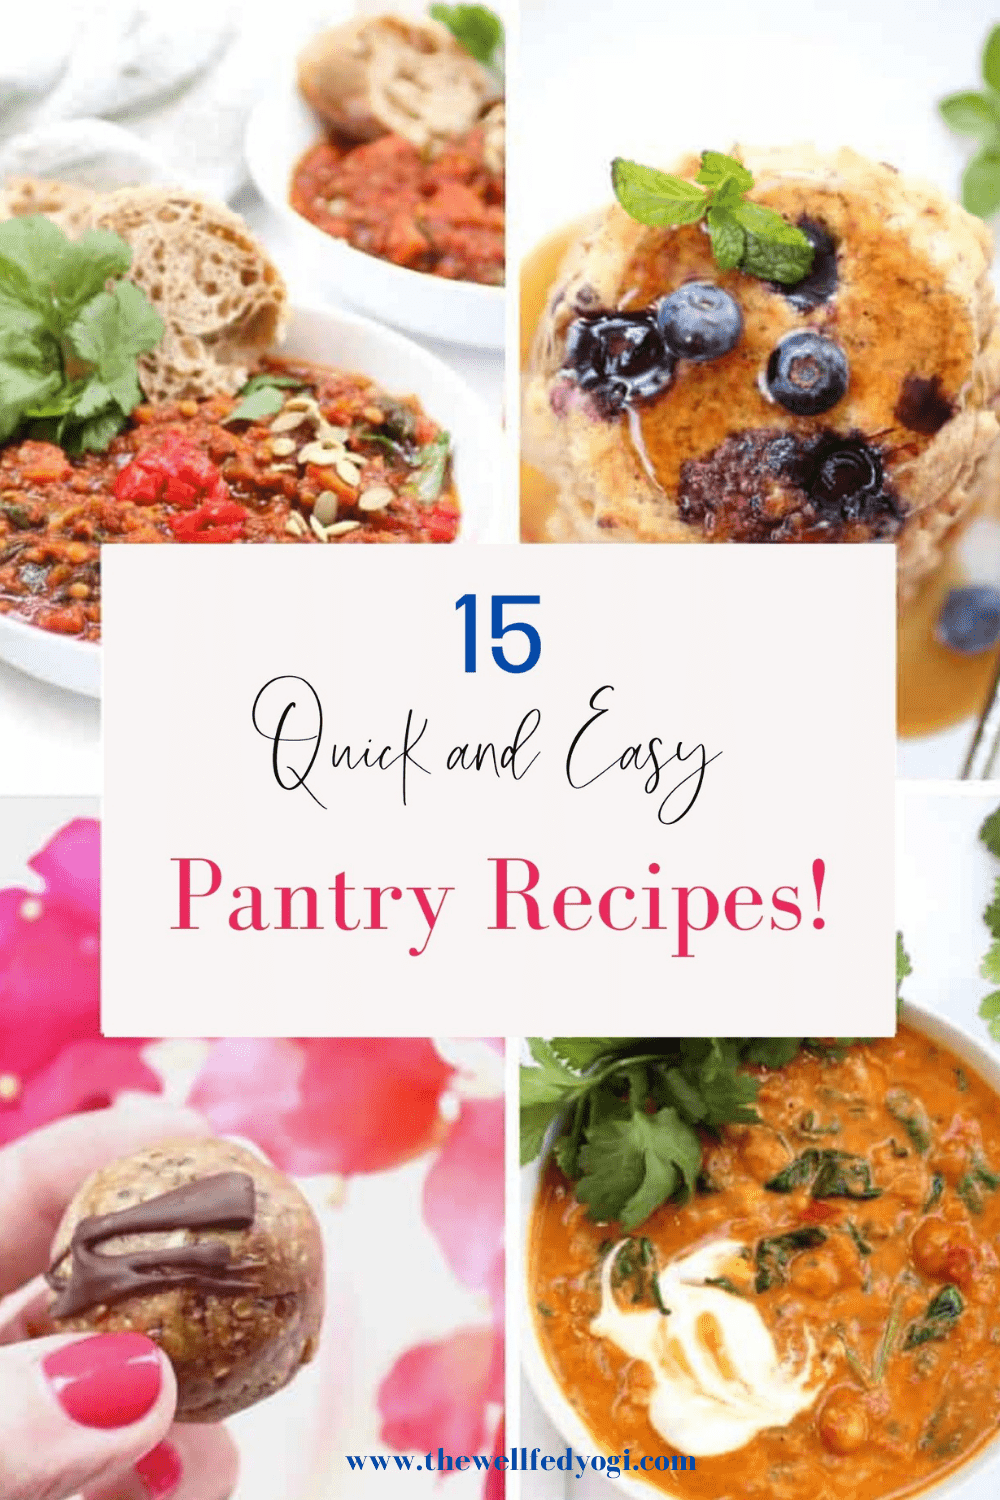 15 Quick and Easy Pantry Recipes